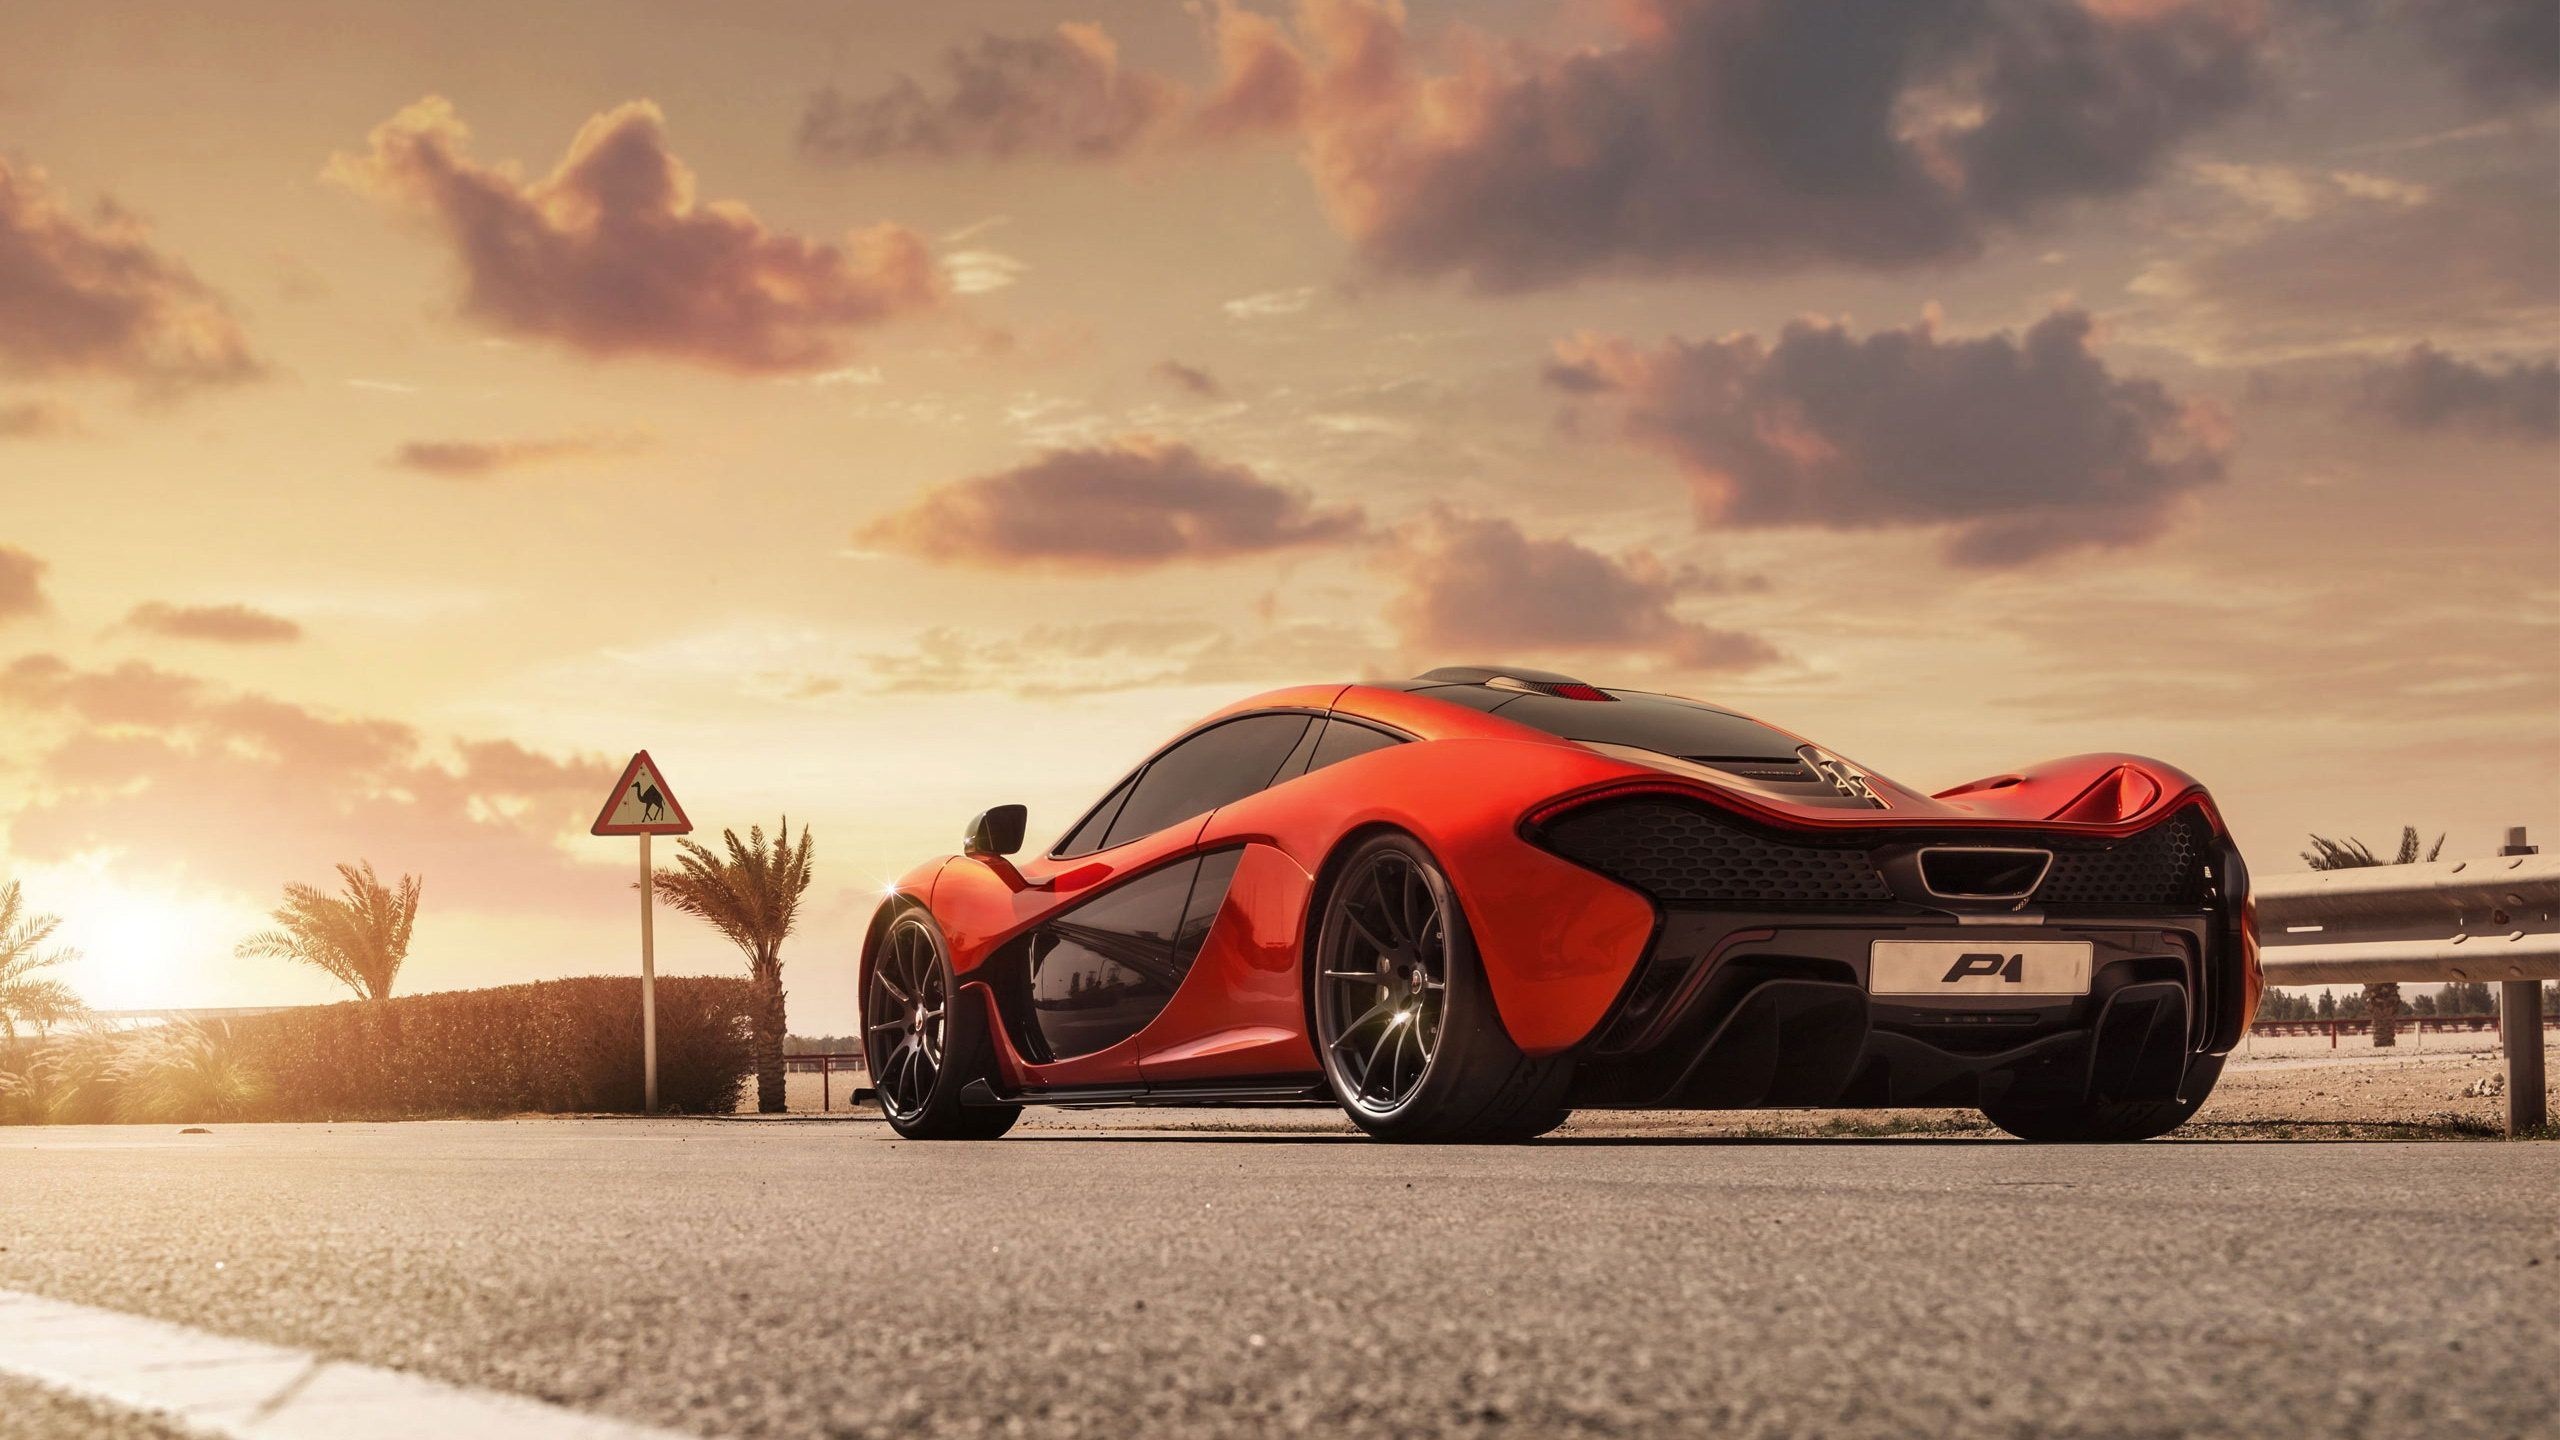 Sports Car: McLaren P1, Prioritize performance over practicality. 2560x1440 HD Background.